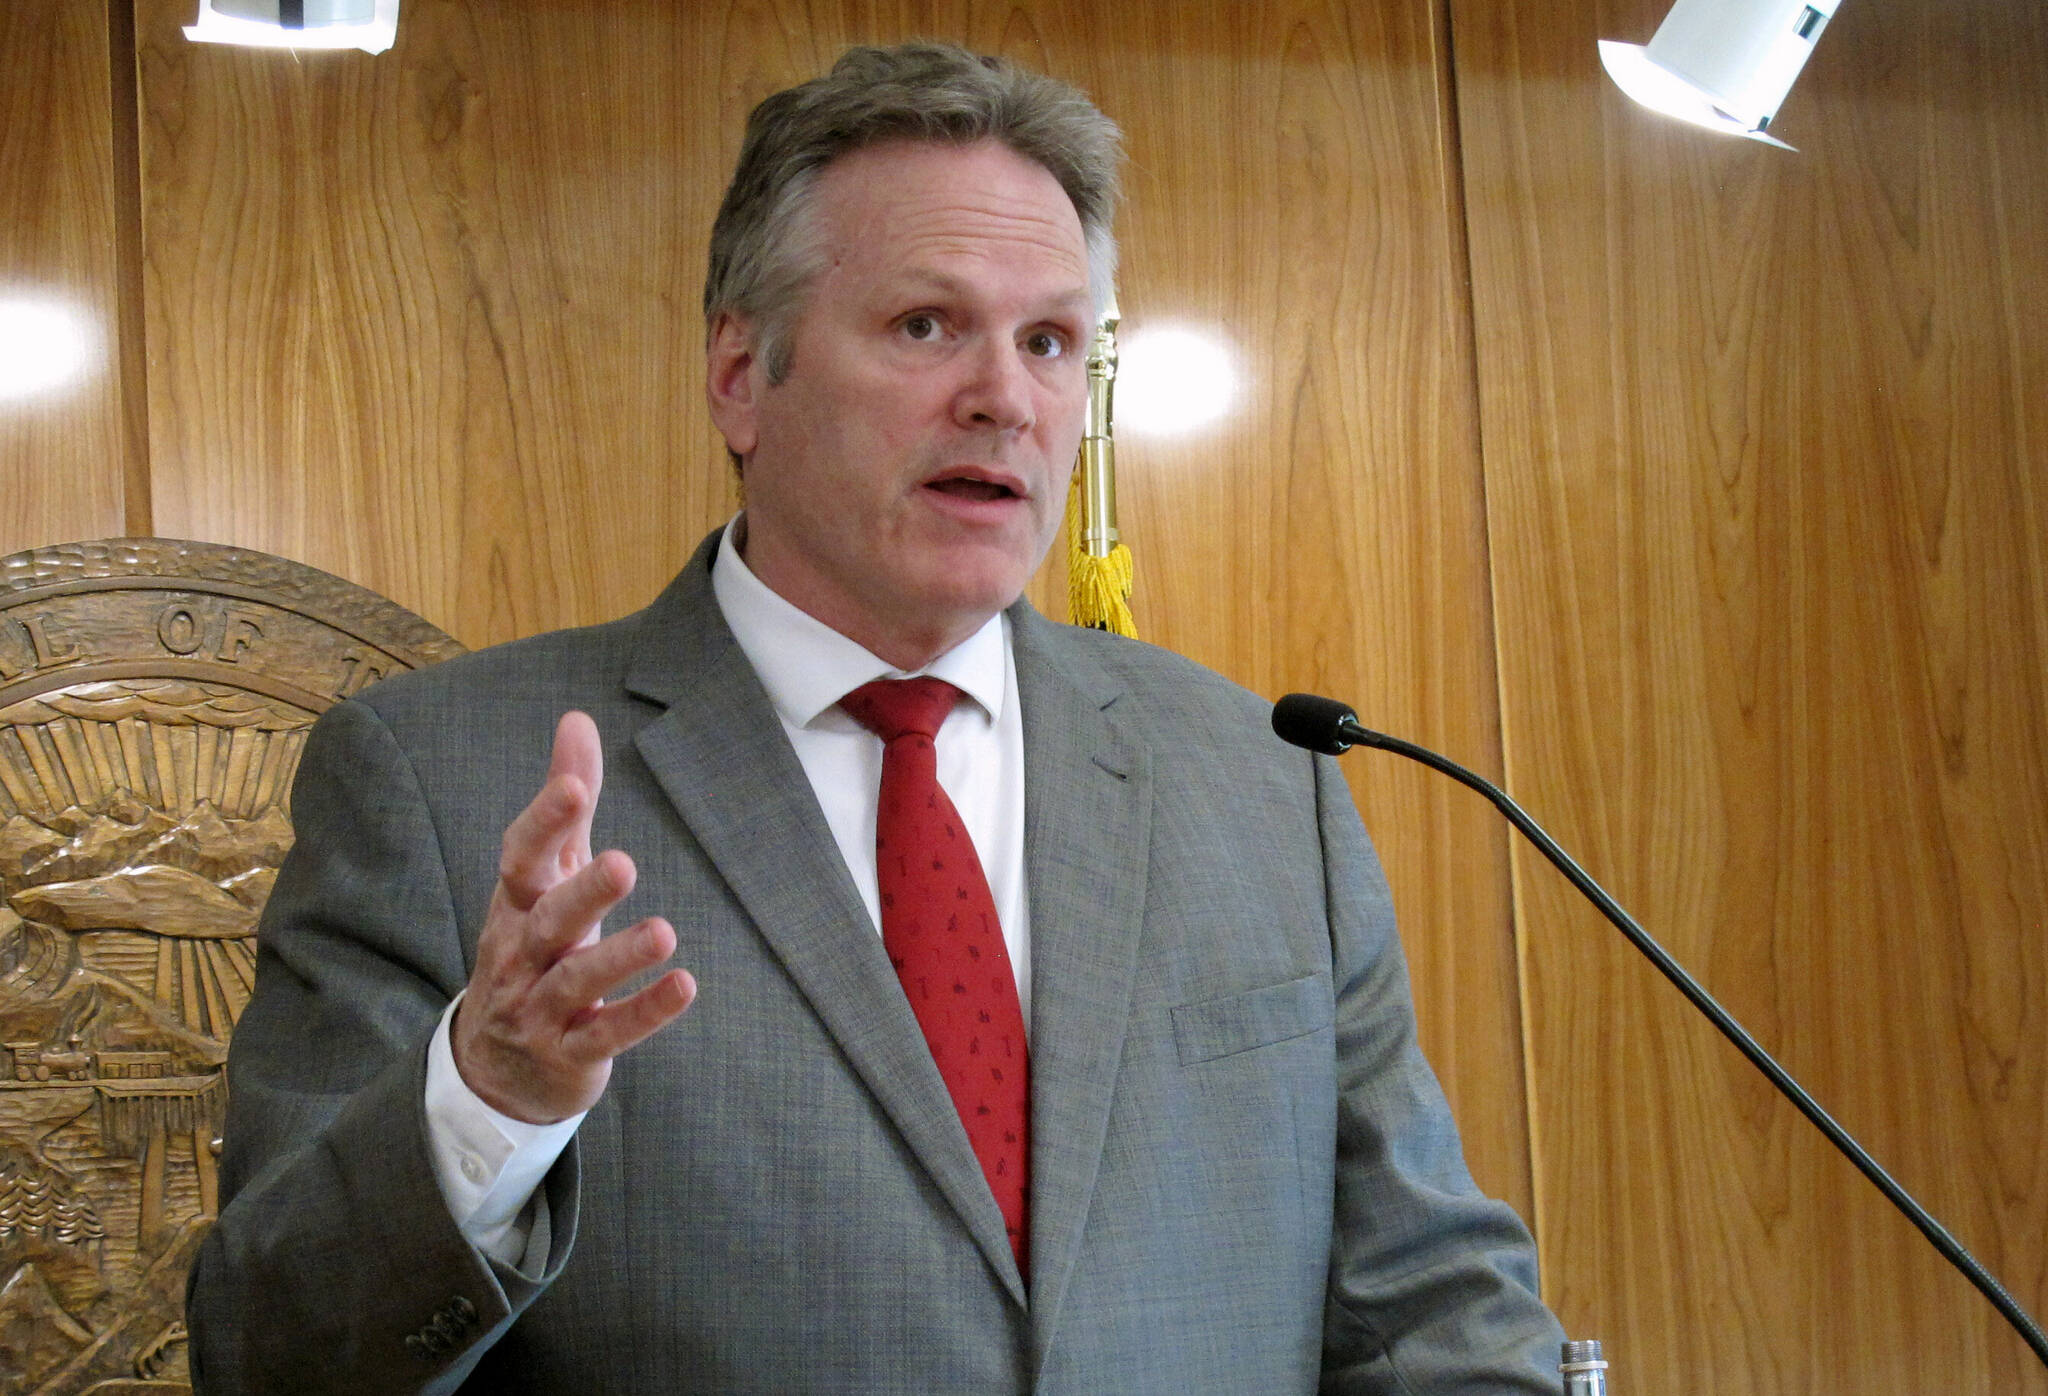 Alaska Gov. Mike Dunleavy speaks to reporters during a news conference at the state Capitol on April 28, 2022, in Juneau, Alaska. (AP Photo/Becky Bohrer, File)